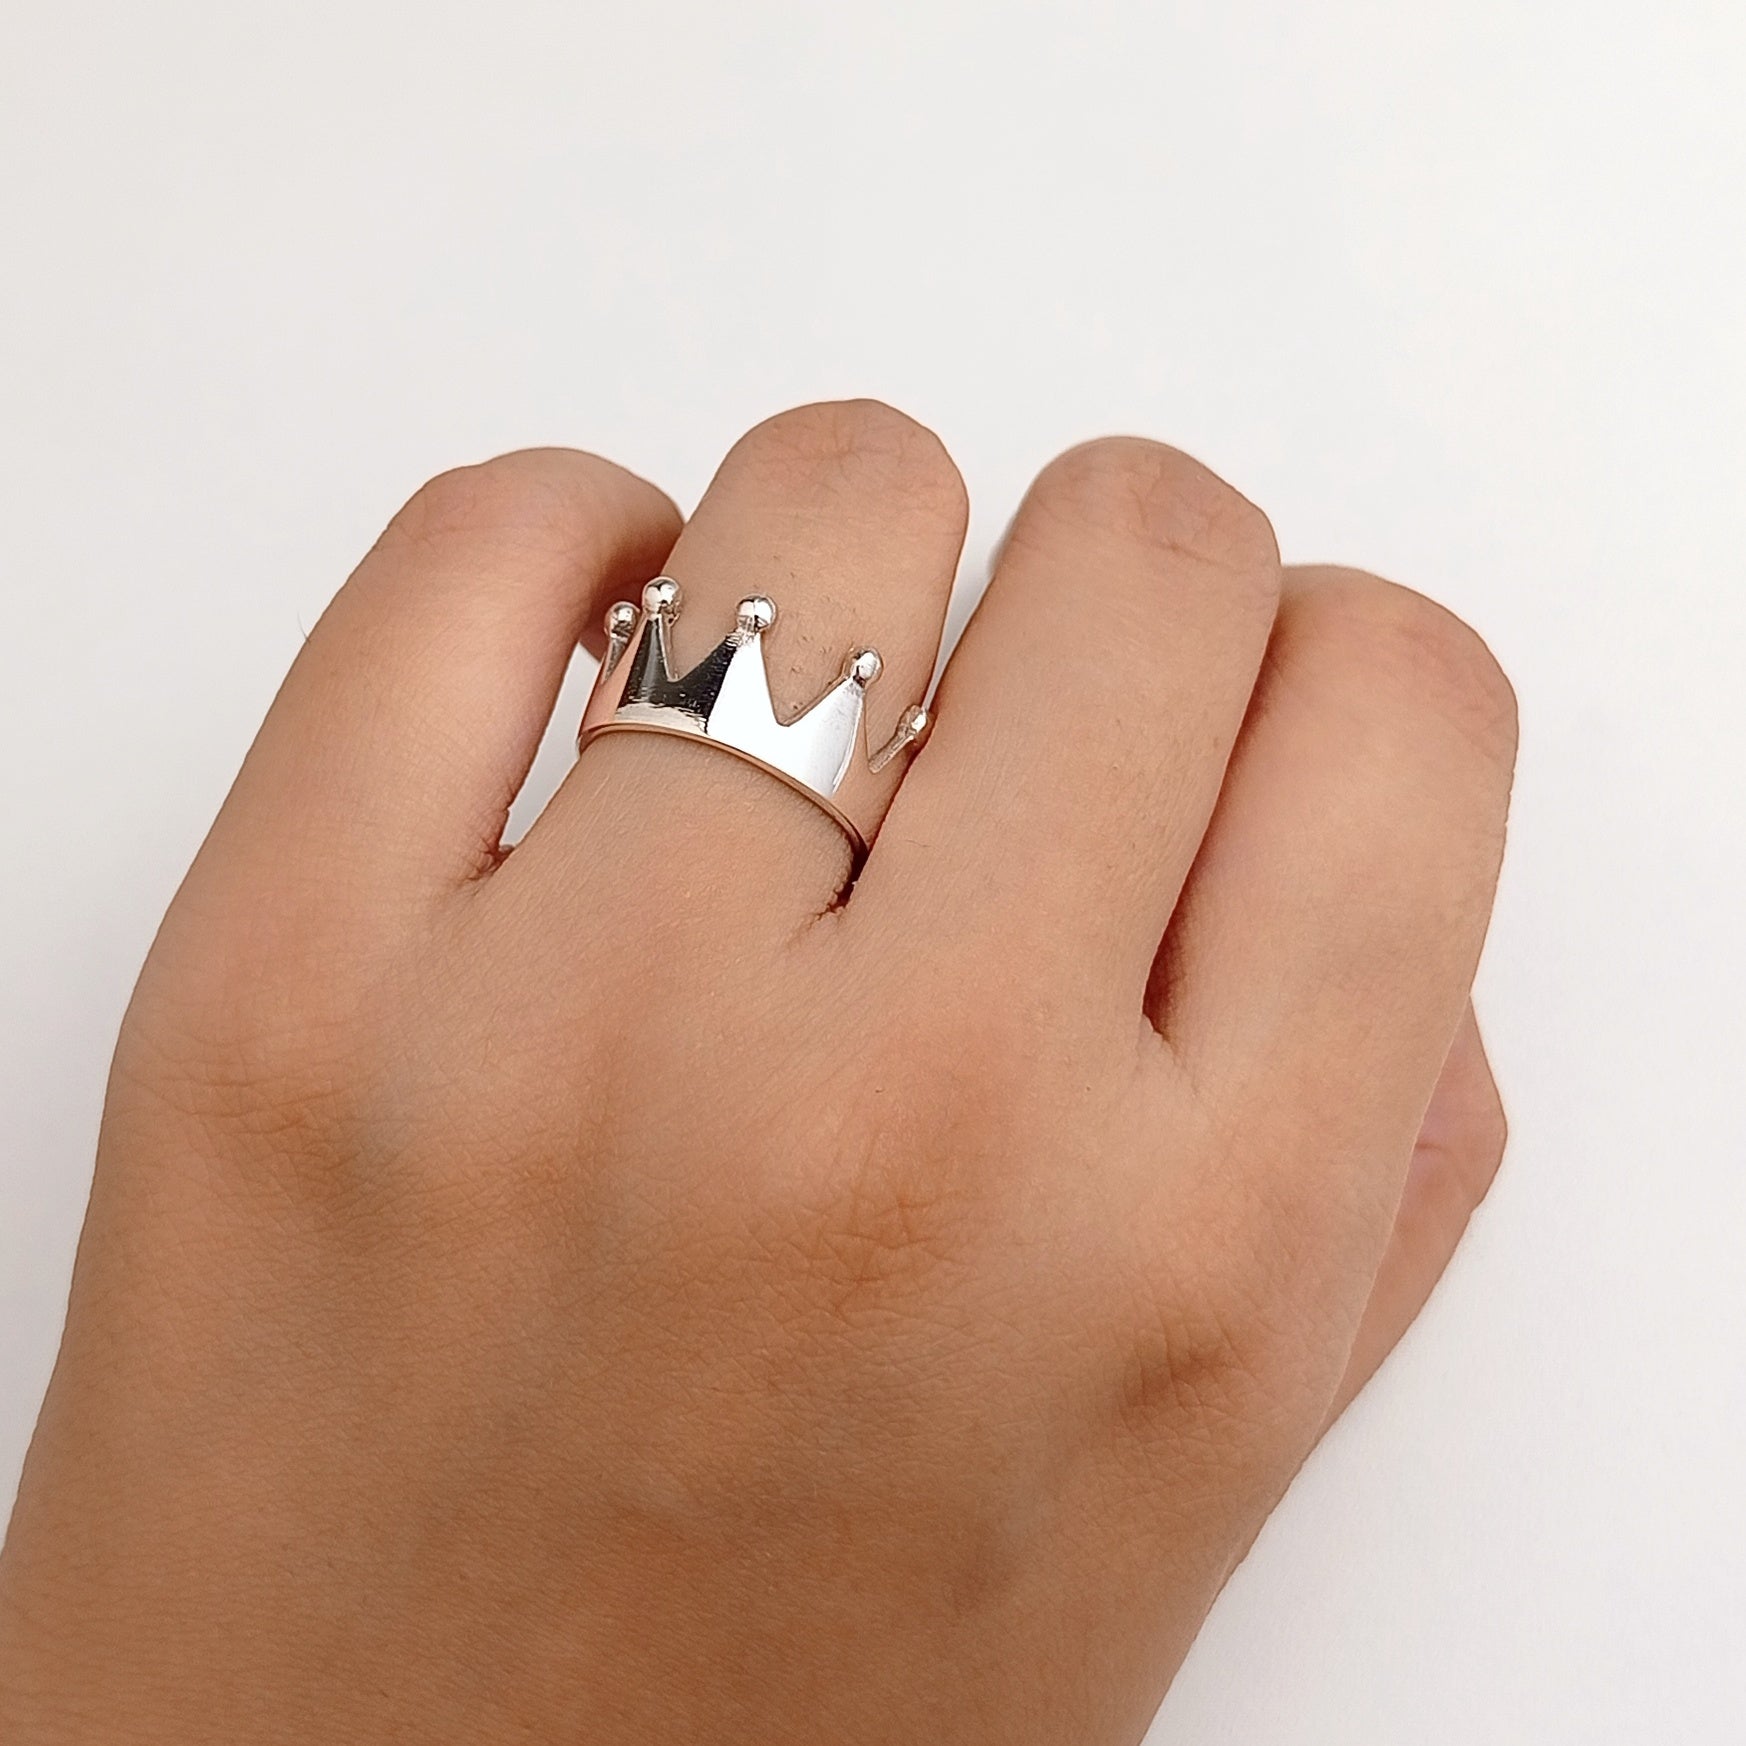 Buy Silver-Toned & White Rings for Women by I Jewels Online | Ajio.com